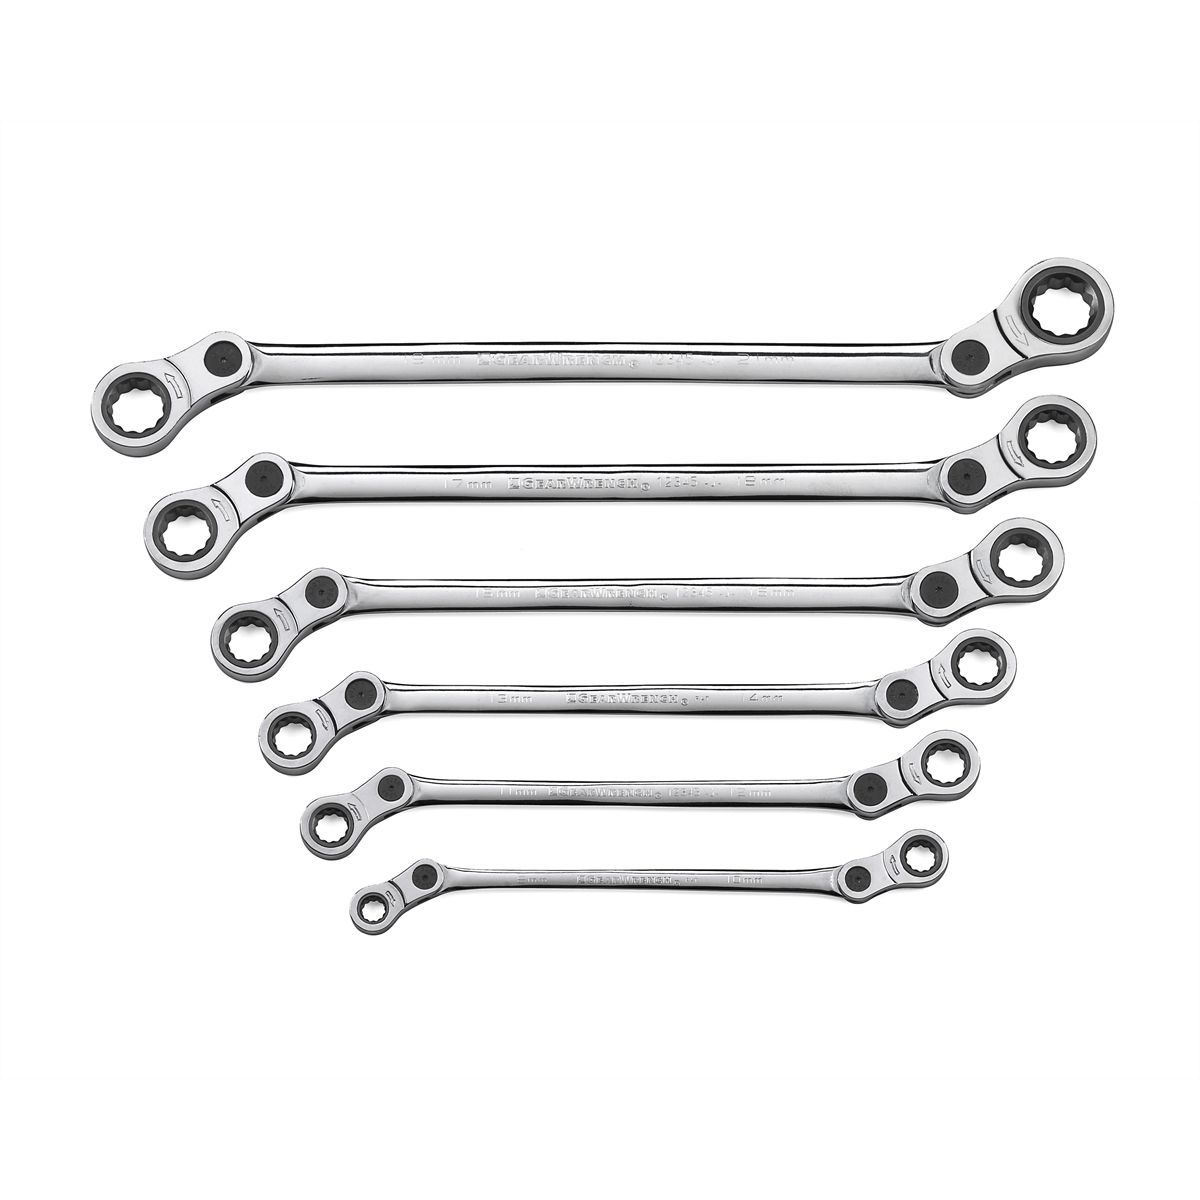 GEARWRENCH 85498 8-Piece SAE Indexing Combination Wrench Set Cooper Tools